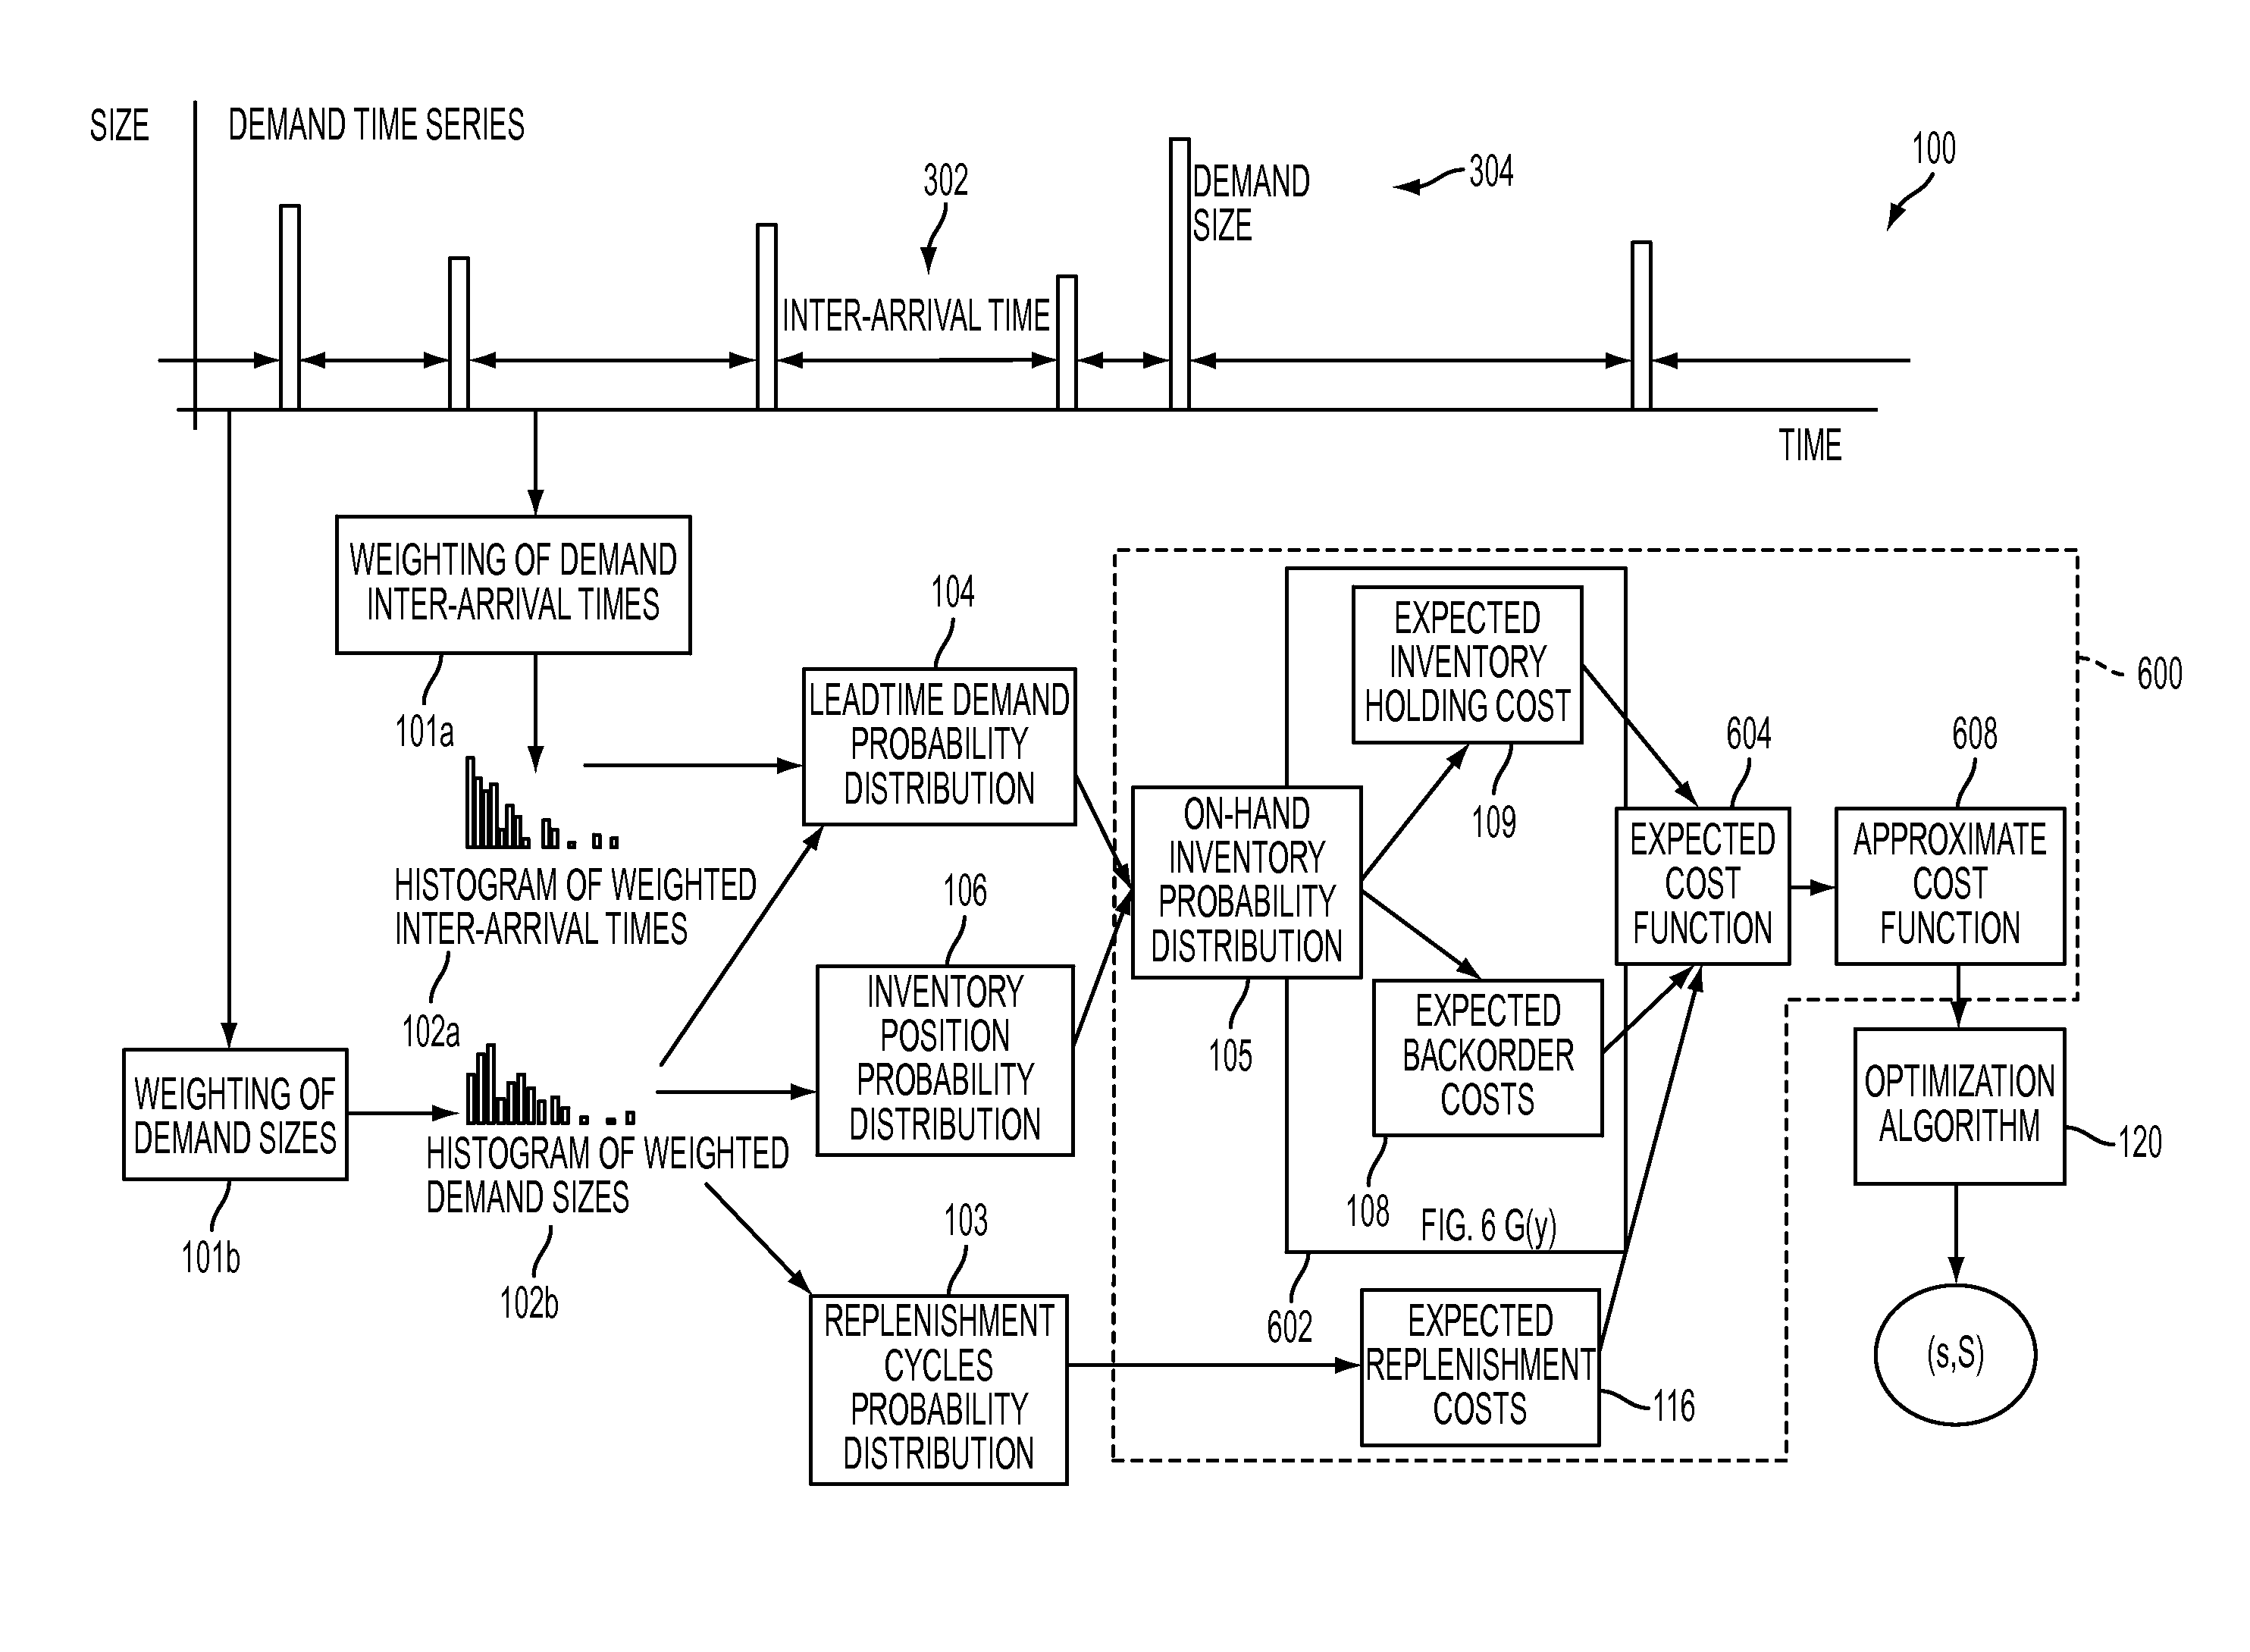 Method and computer system for setting inventory control levels from demand inter-arrival time, demand size statistics